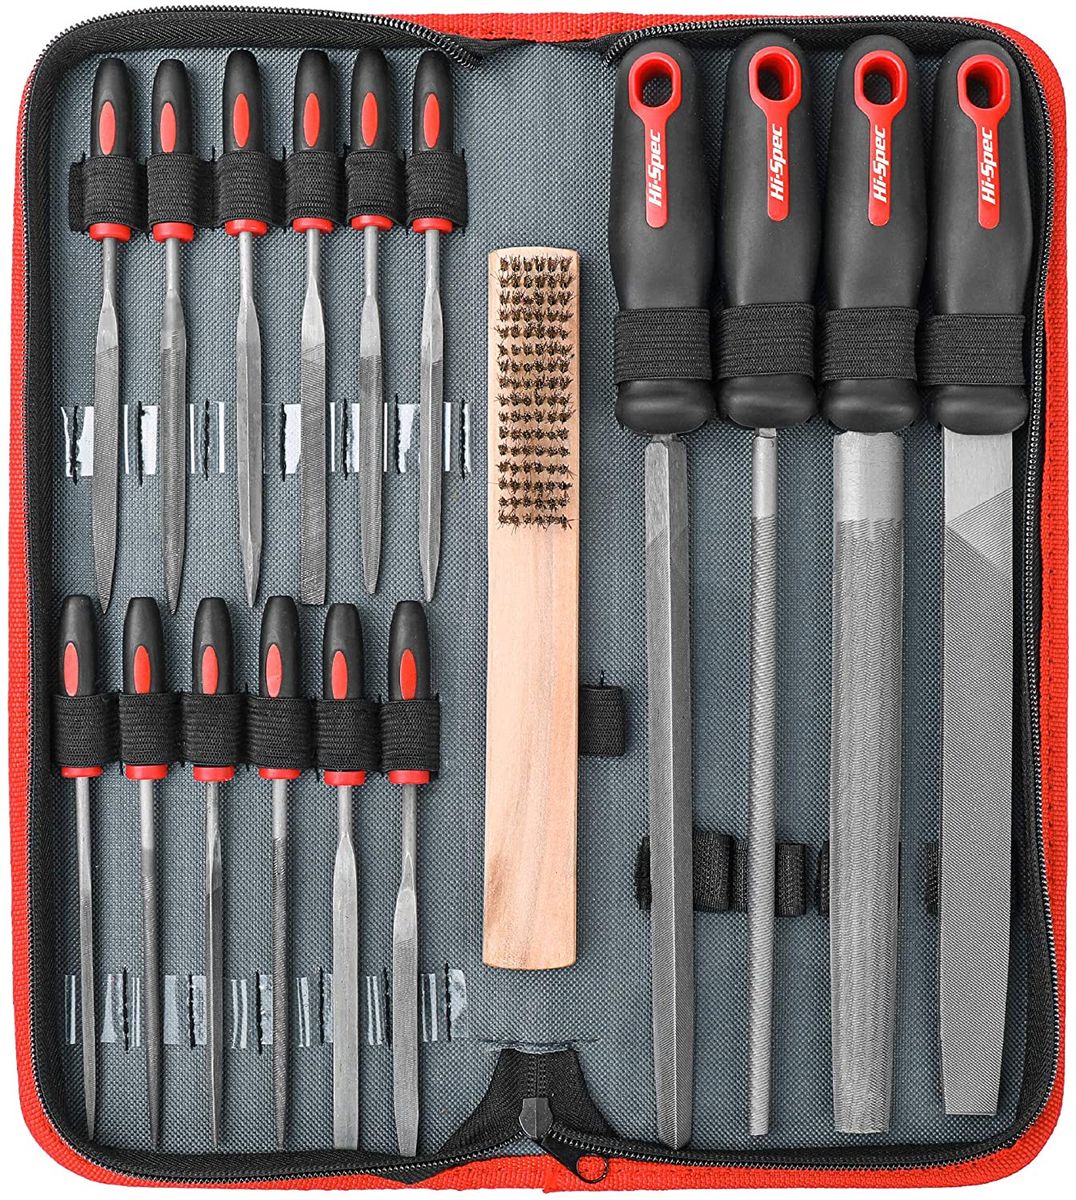 Hi-Spec 17 Piece Carbon-Steel Hand & Needle File and Wire Brush Tool Set